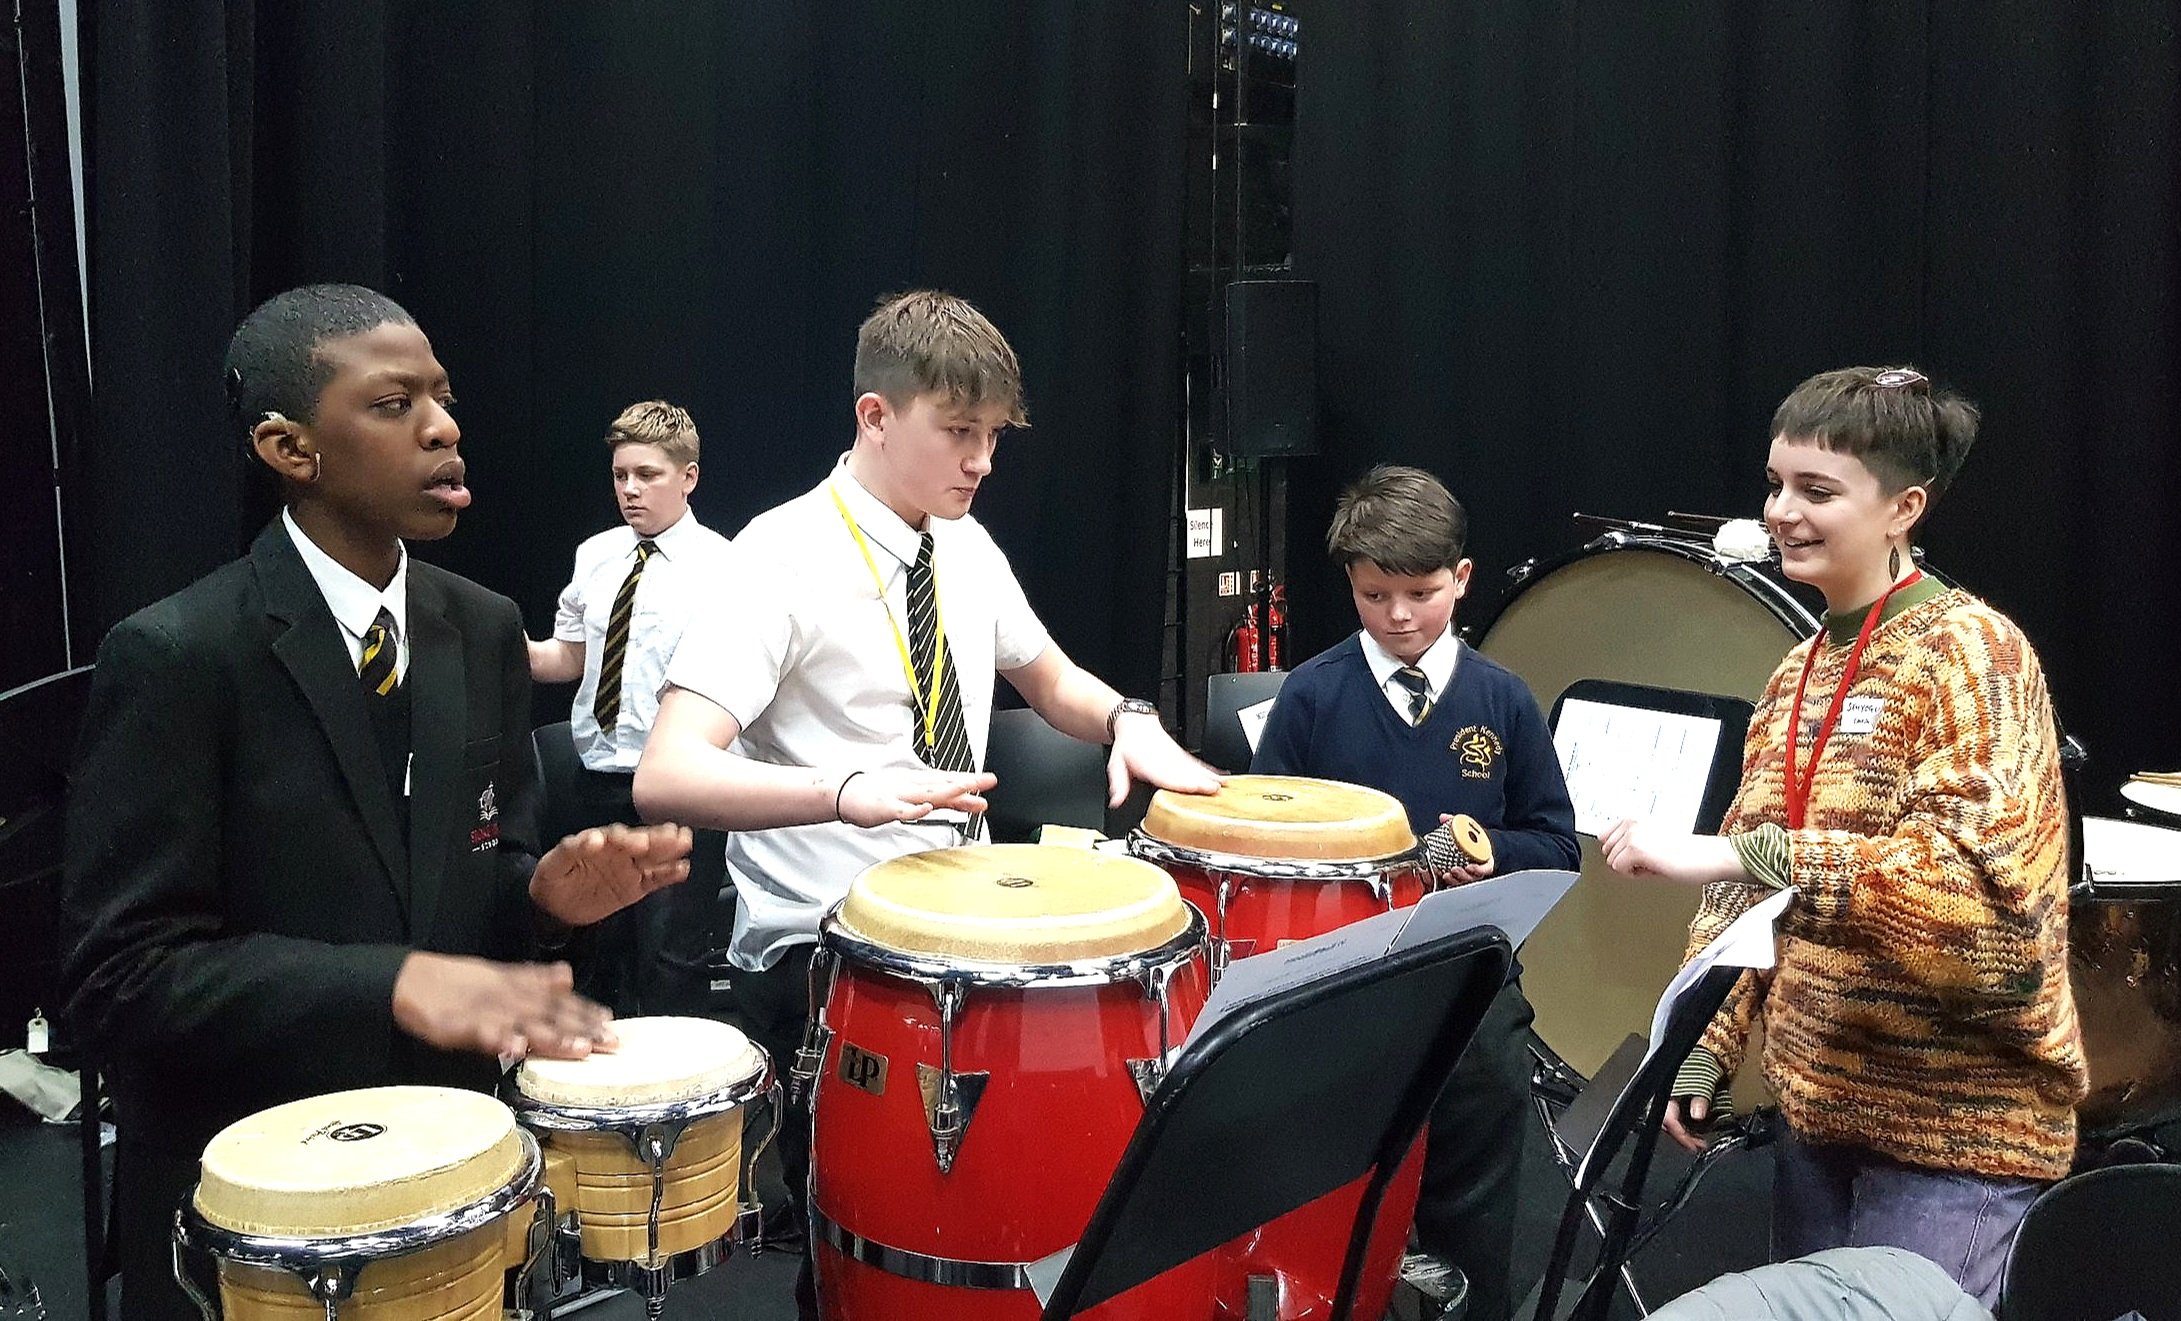 A Royal Birmingham Conservatoire student guides the percussion